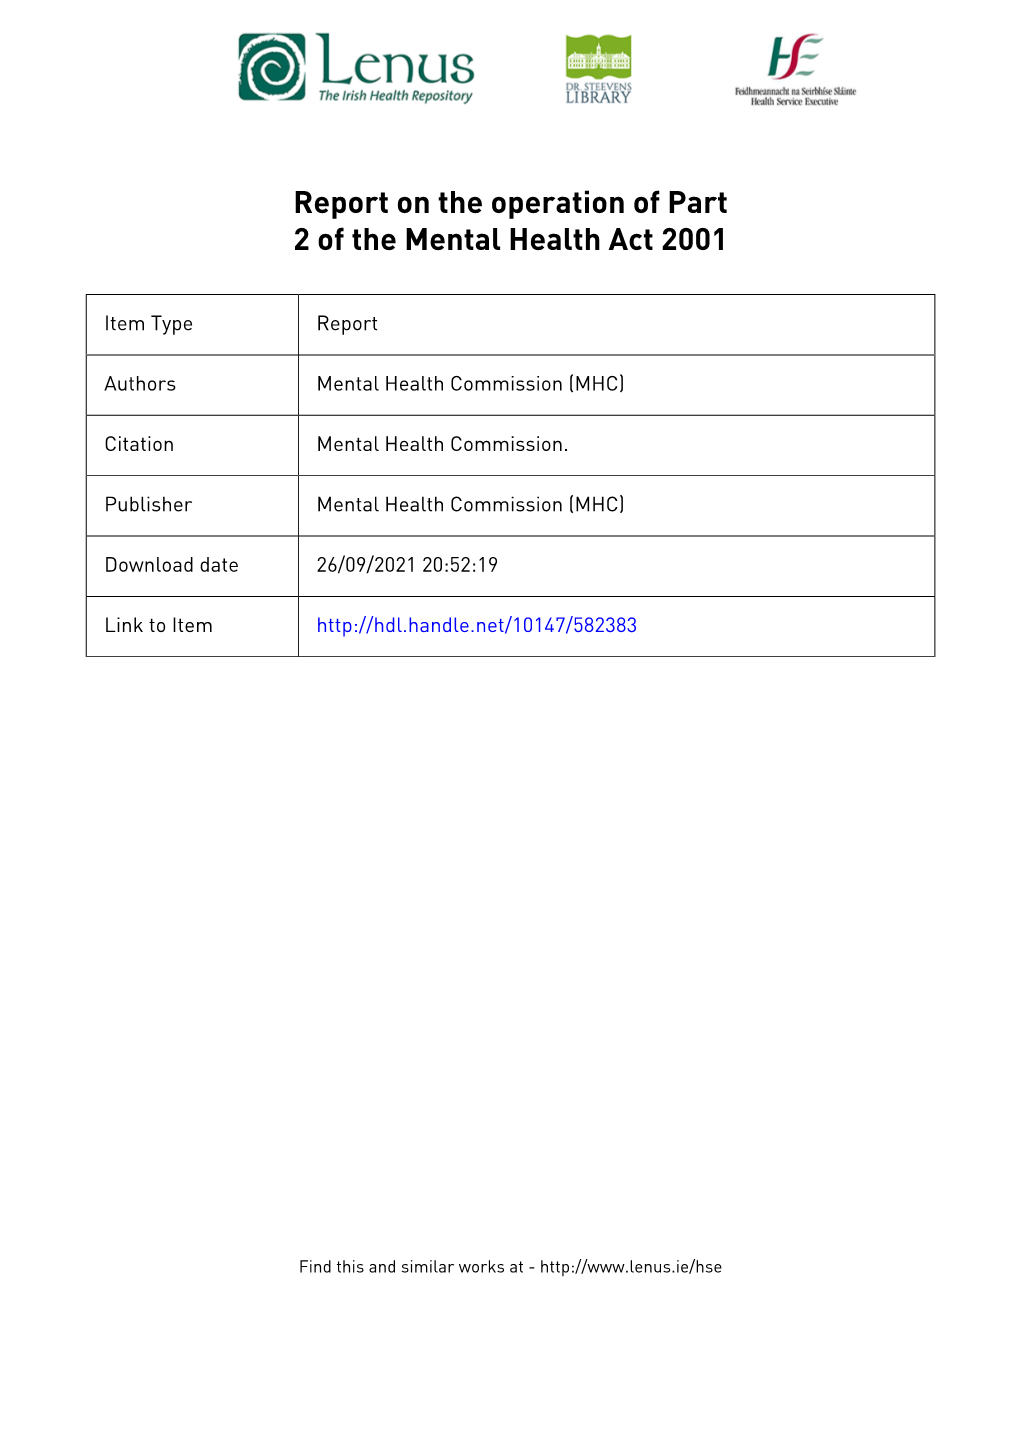 Report on the Operation of Part 2 of the Mental Health Act 2001